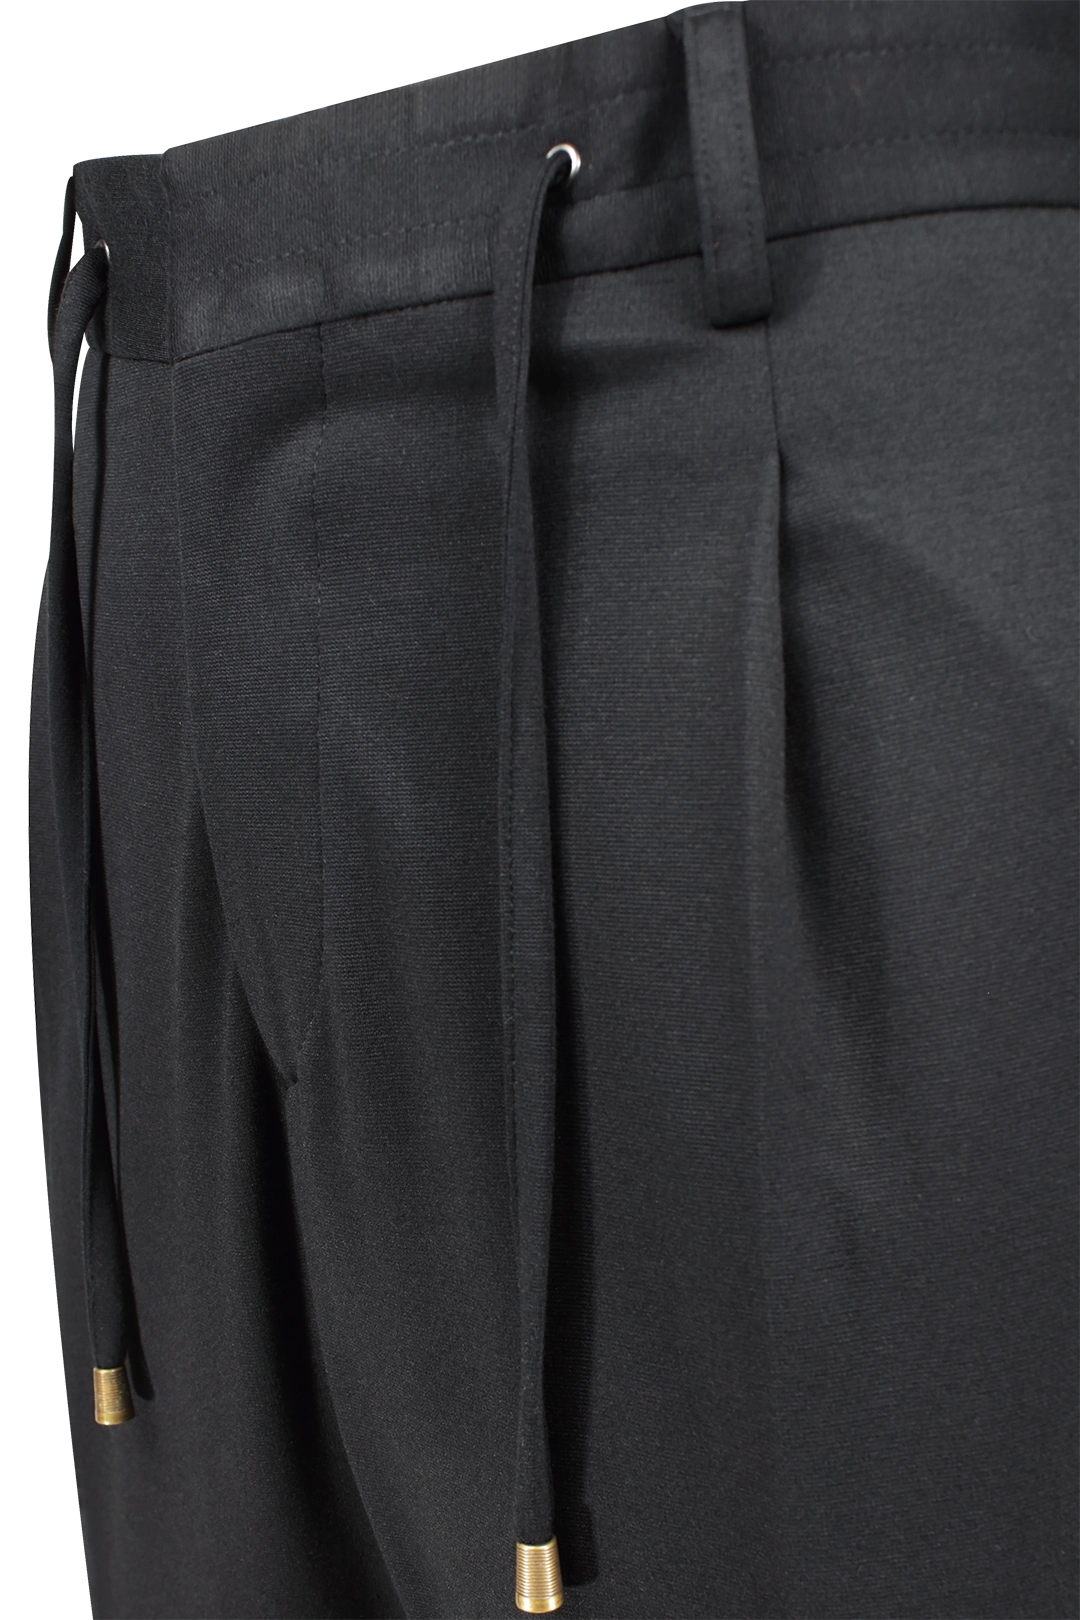 Pantalone con pince e coulisse in jersey nero coulisse